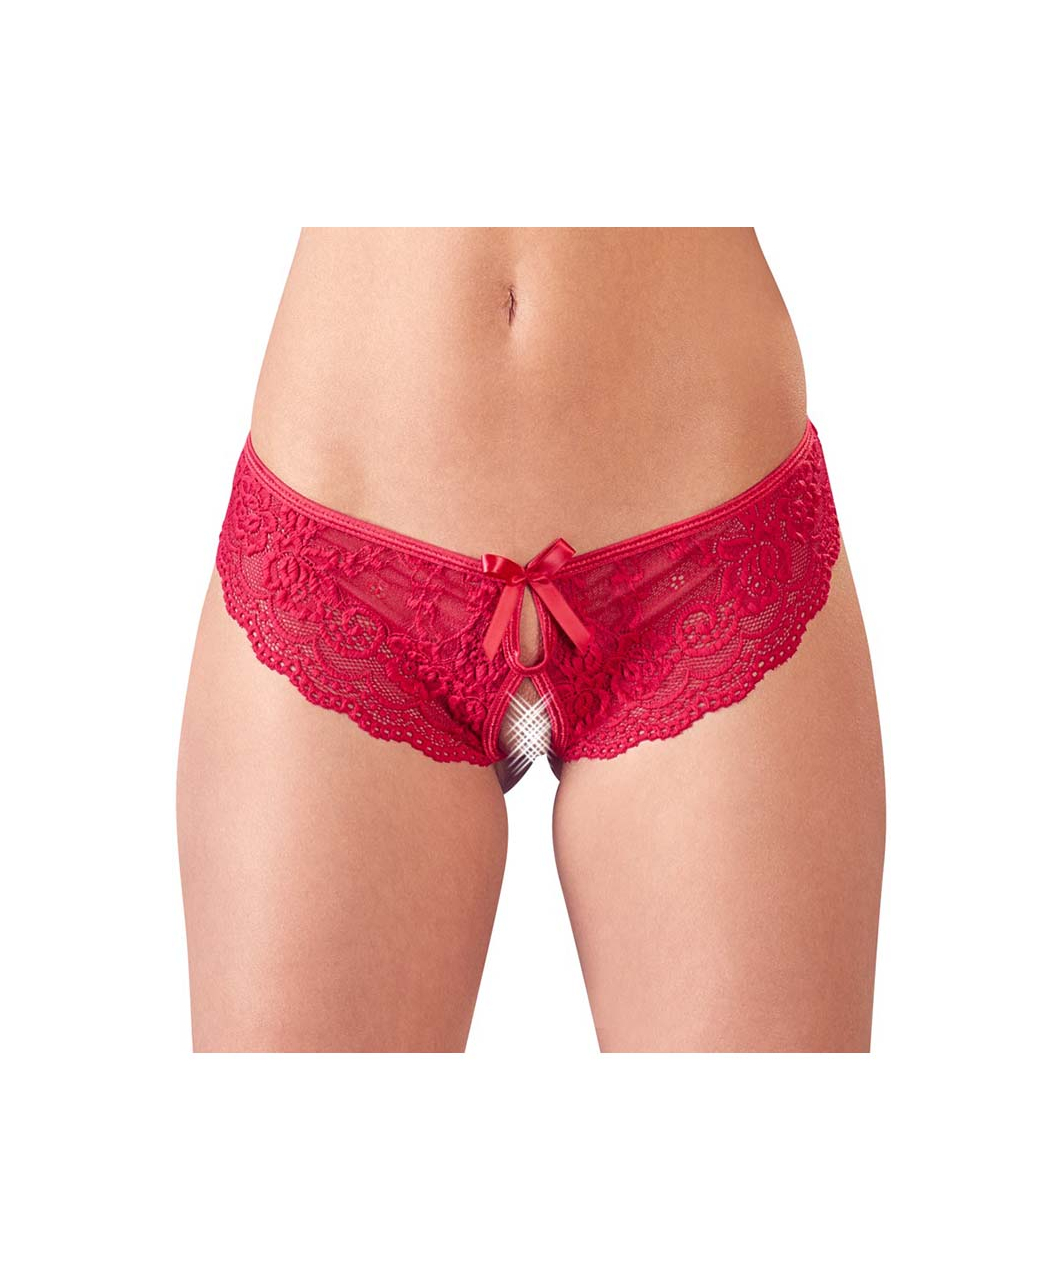 Cottelli Lingerie red lace crotchless panties